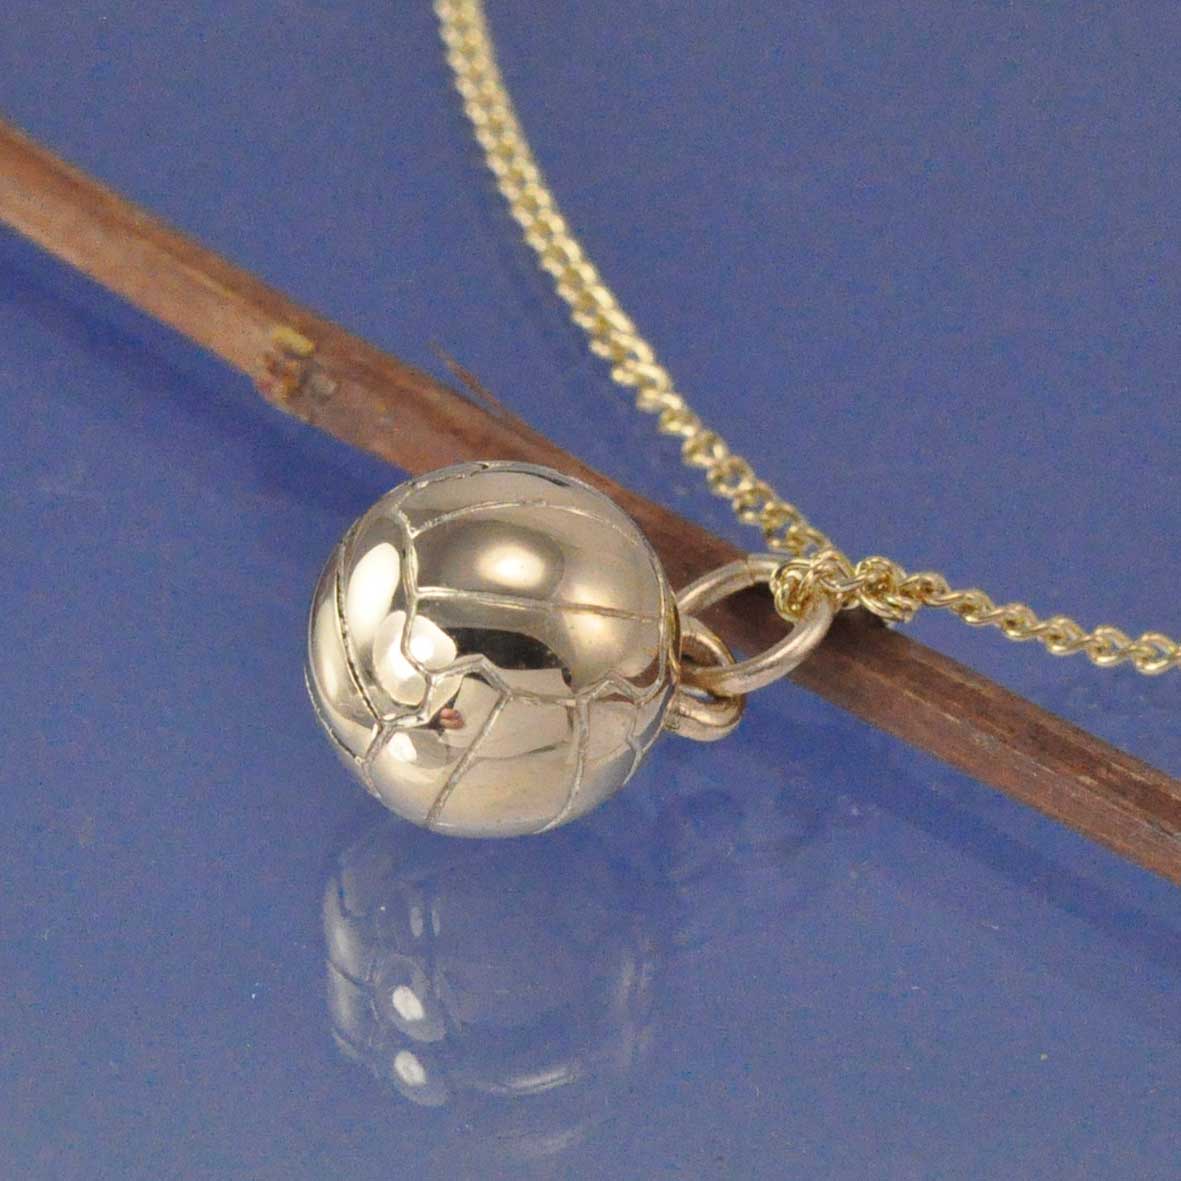 Cremation Ash Necklace - Football. Pendant by Chris Parry Jewellery